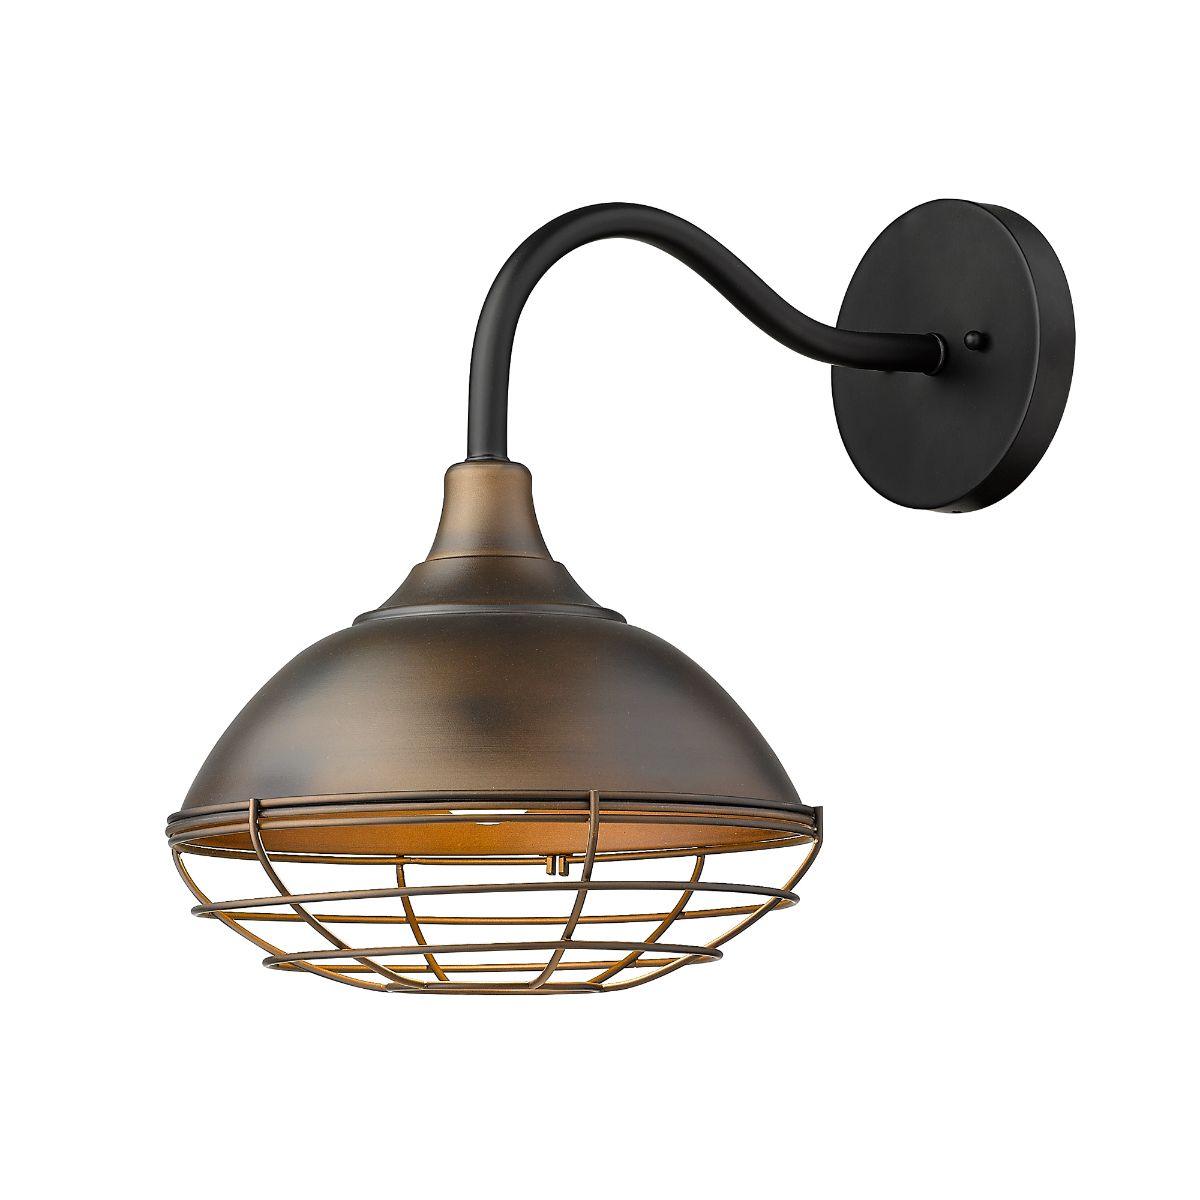 Afton 16 In. Outdoor Wall Sconce Bronze Finish